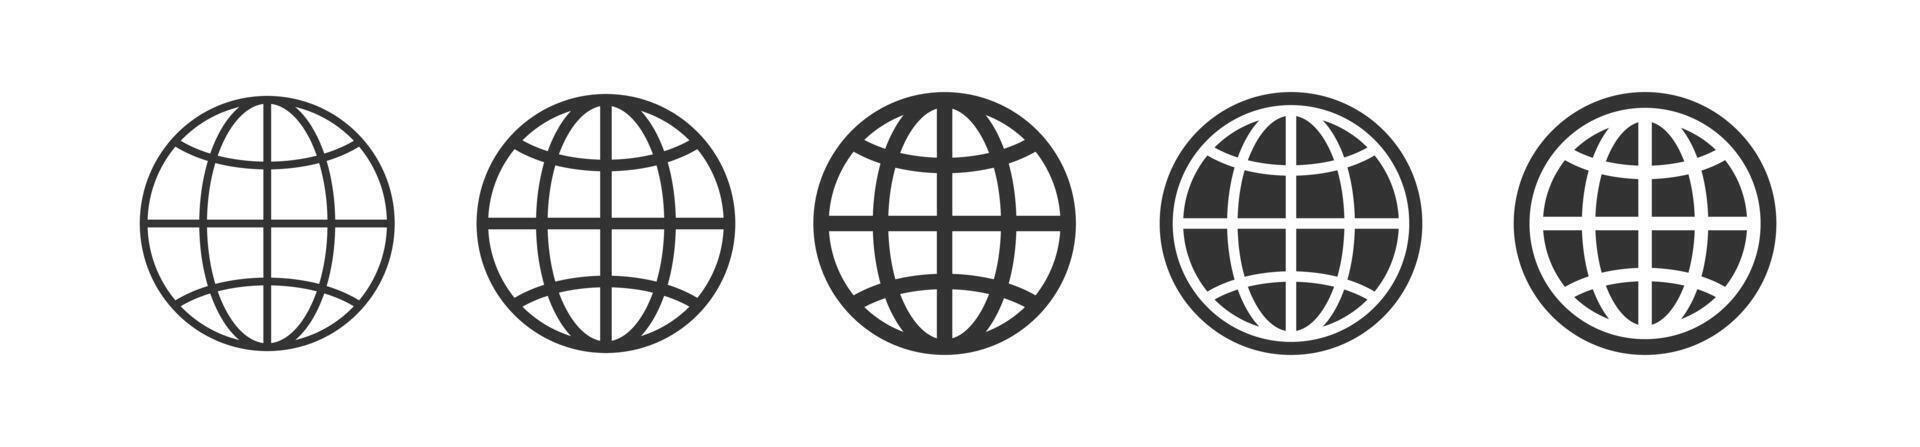 World icon. Network symbol. Earth sphere. Web globe. Website sign. Planet icons set. vector